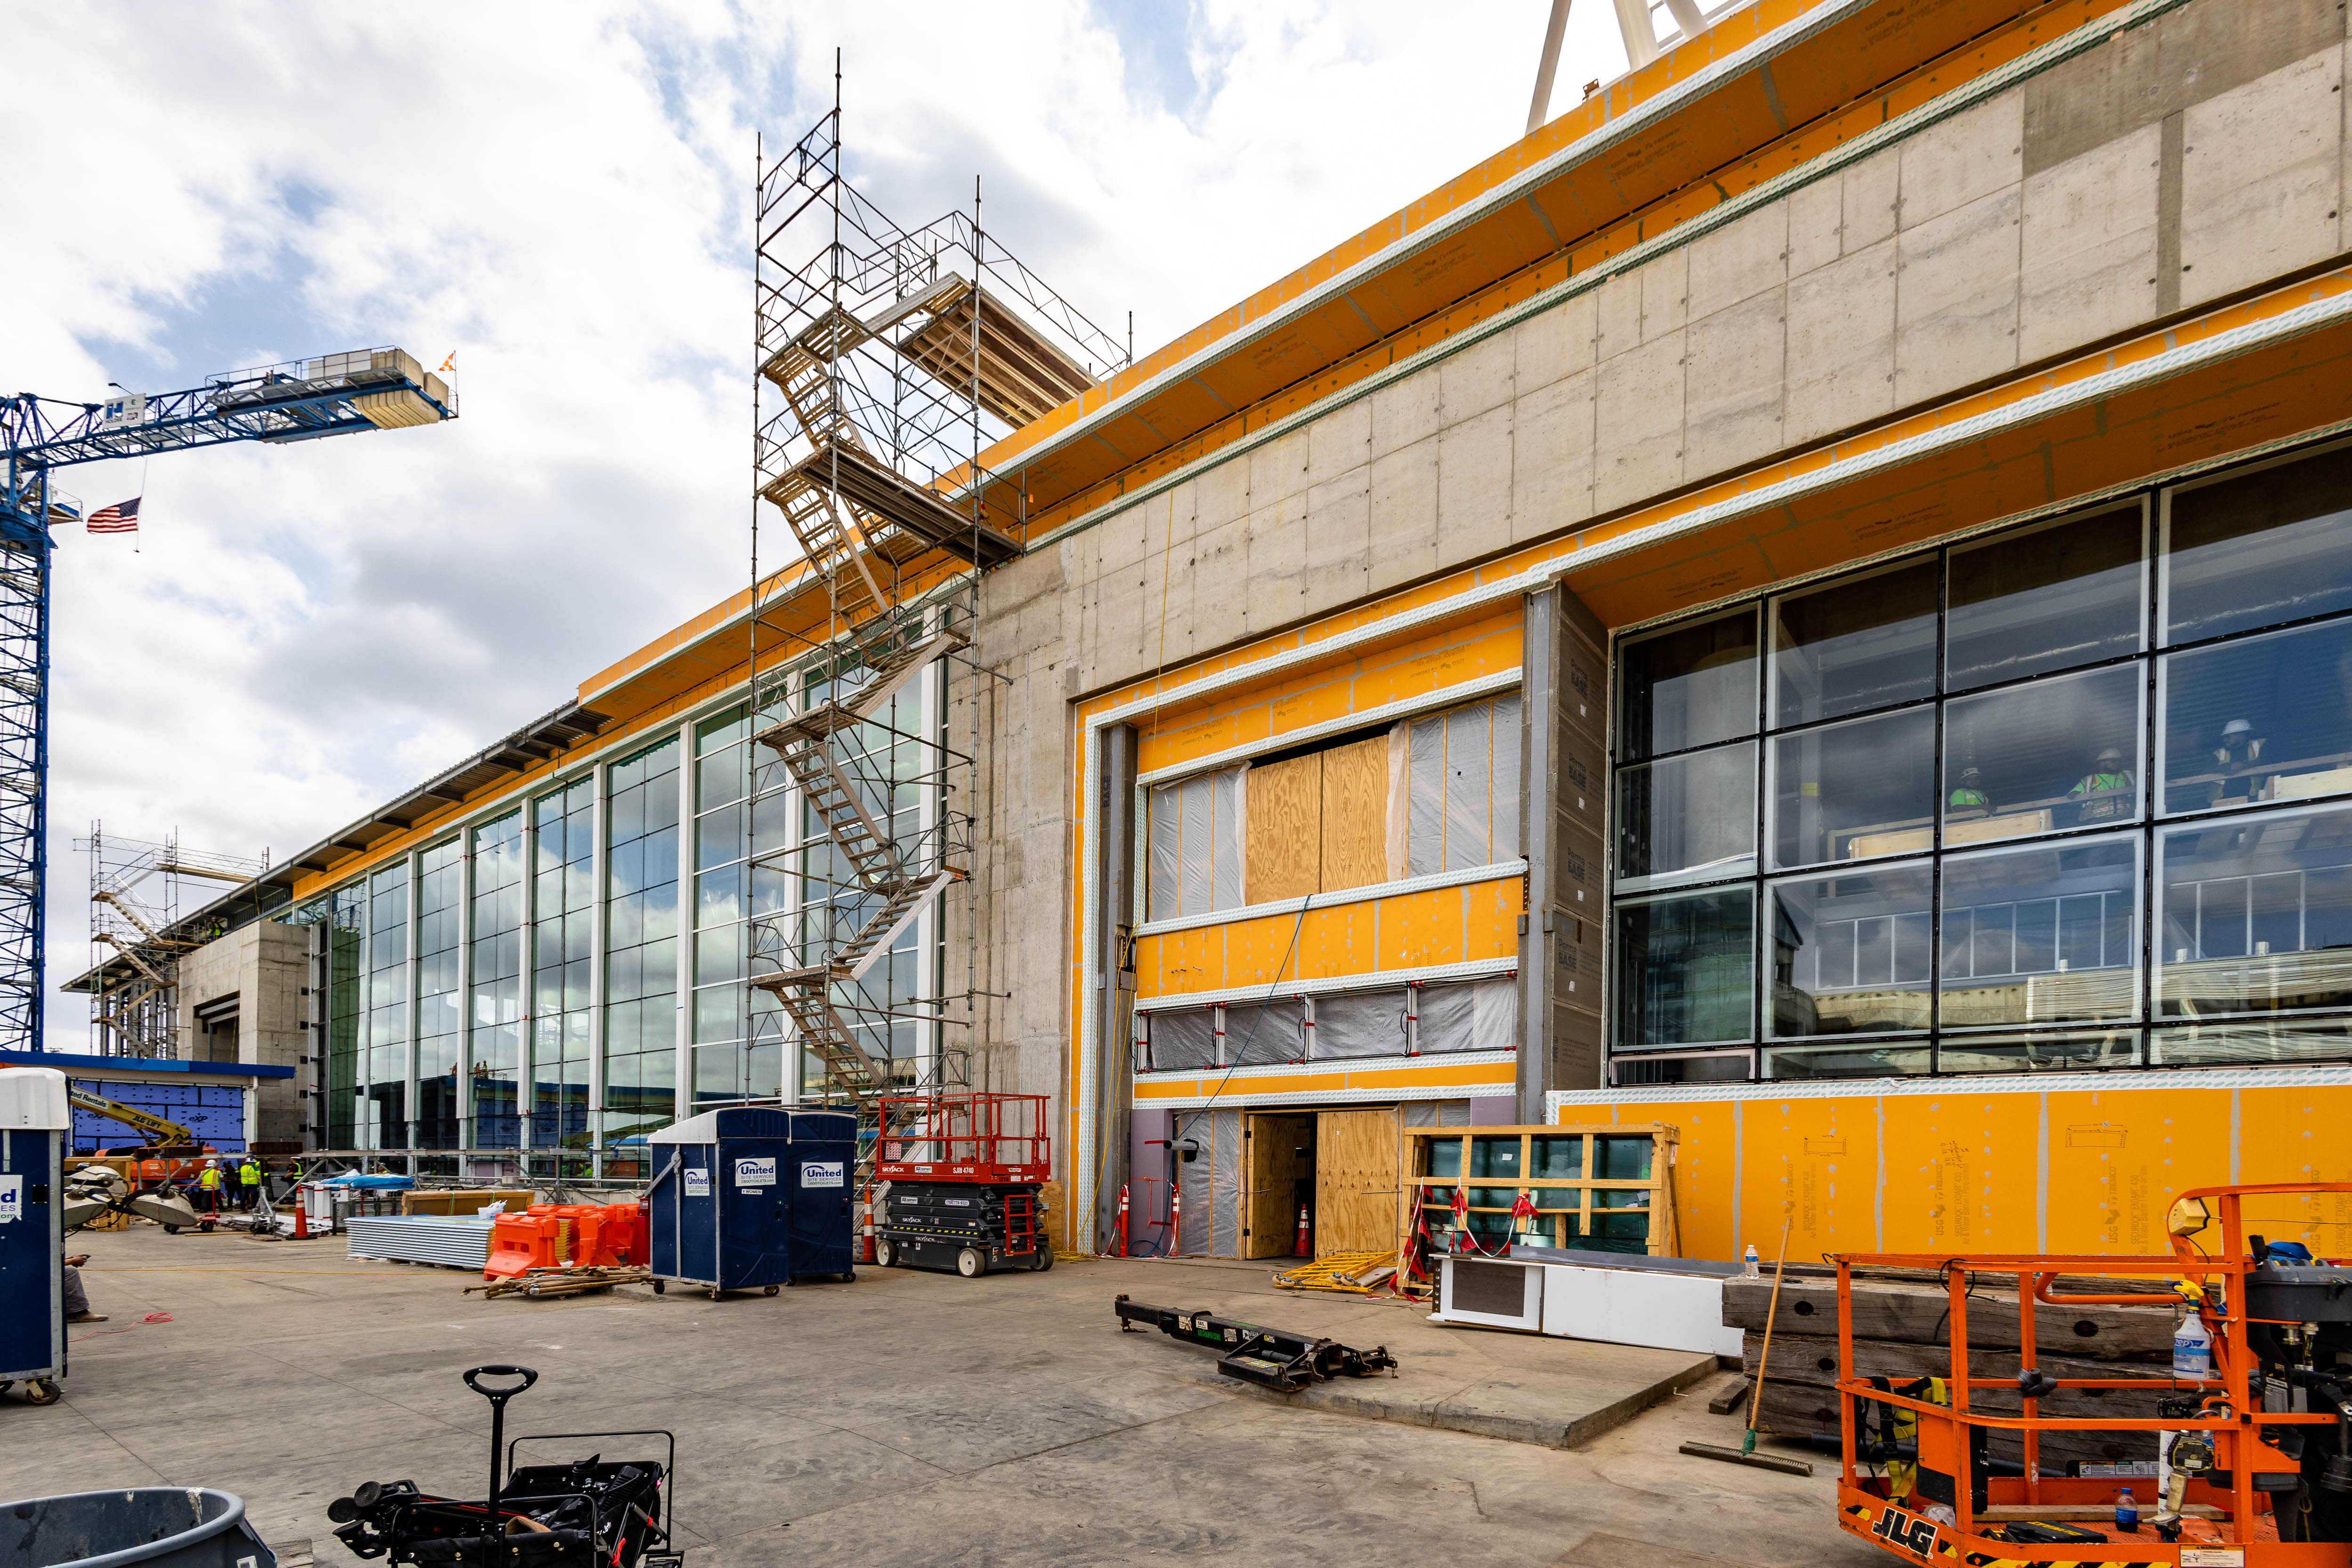 exterior of the terminal lobby expansion is framed by construction cranes